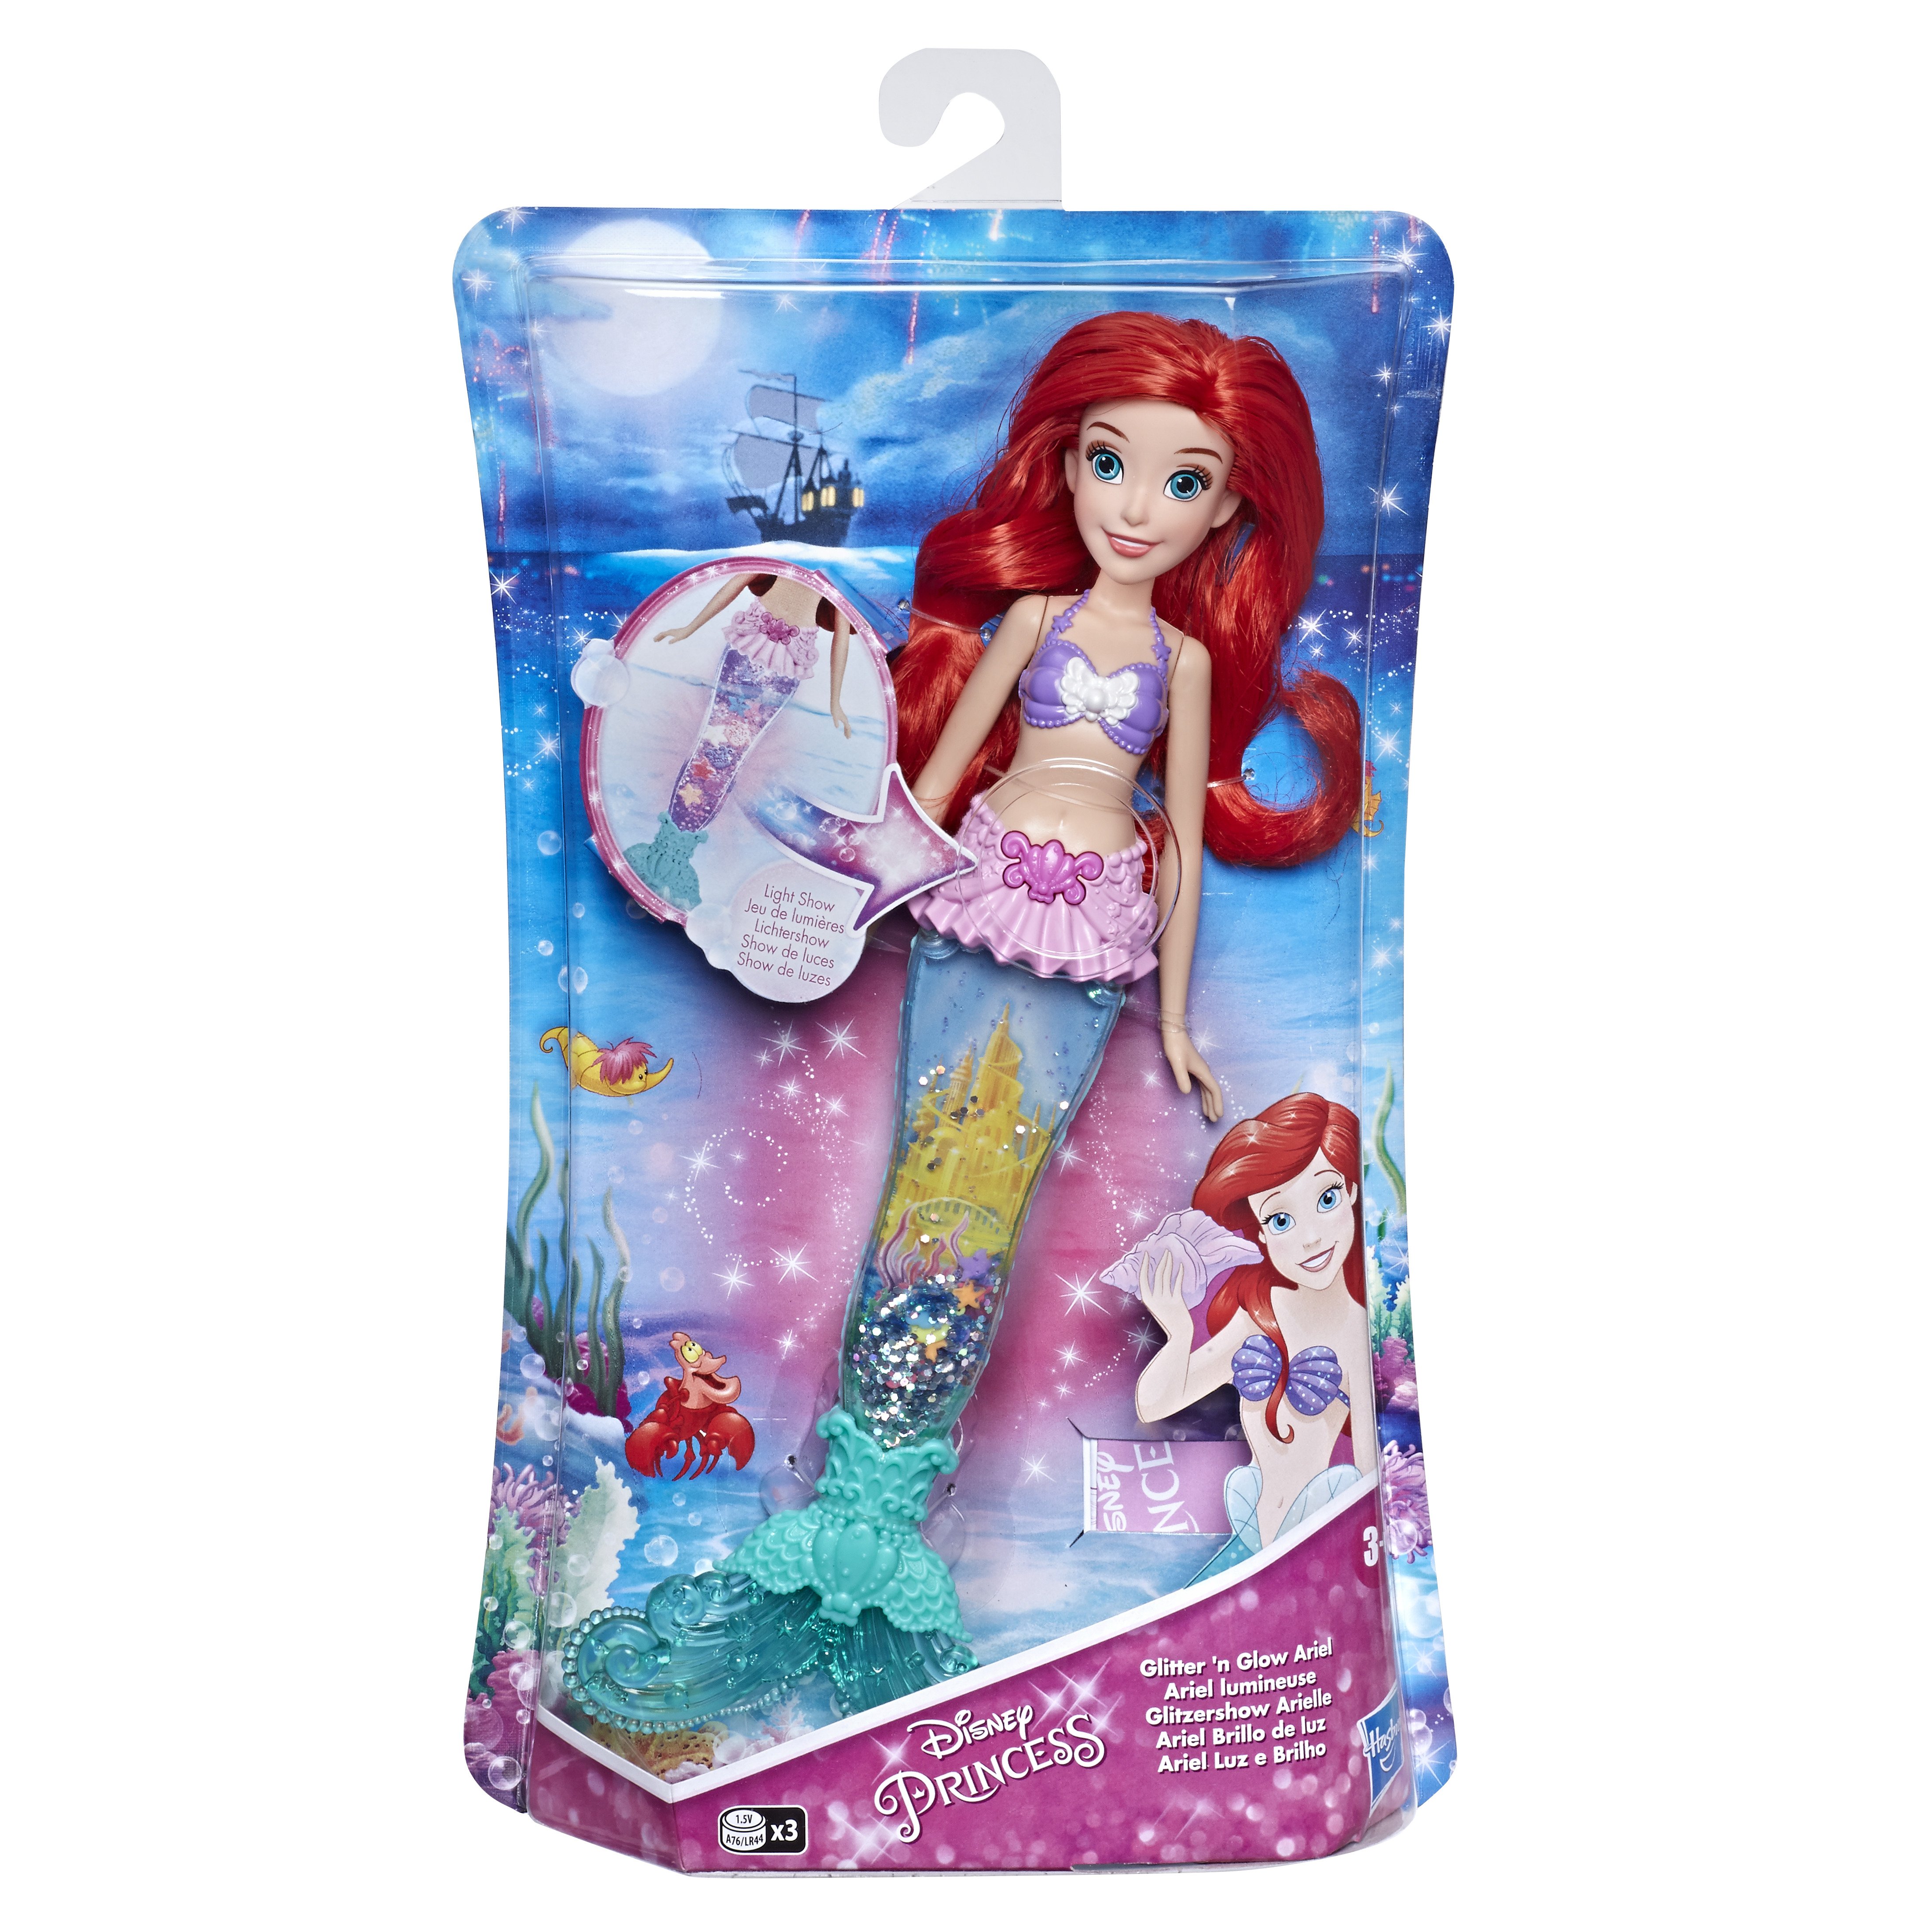 ariel doll collection